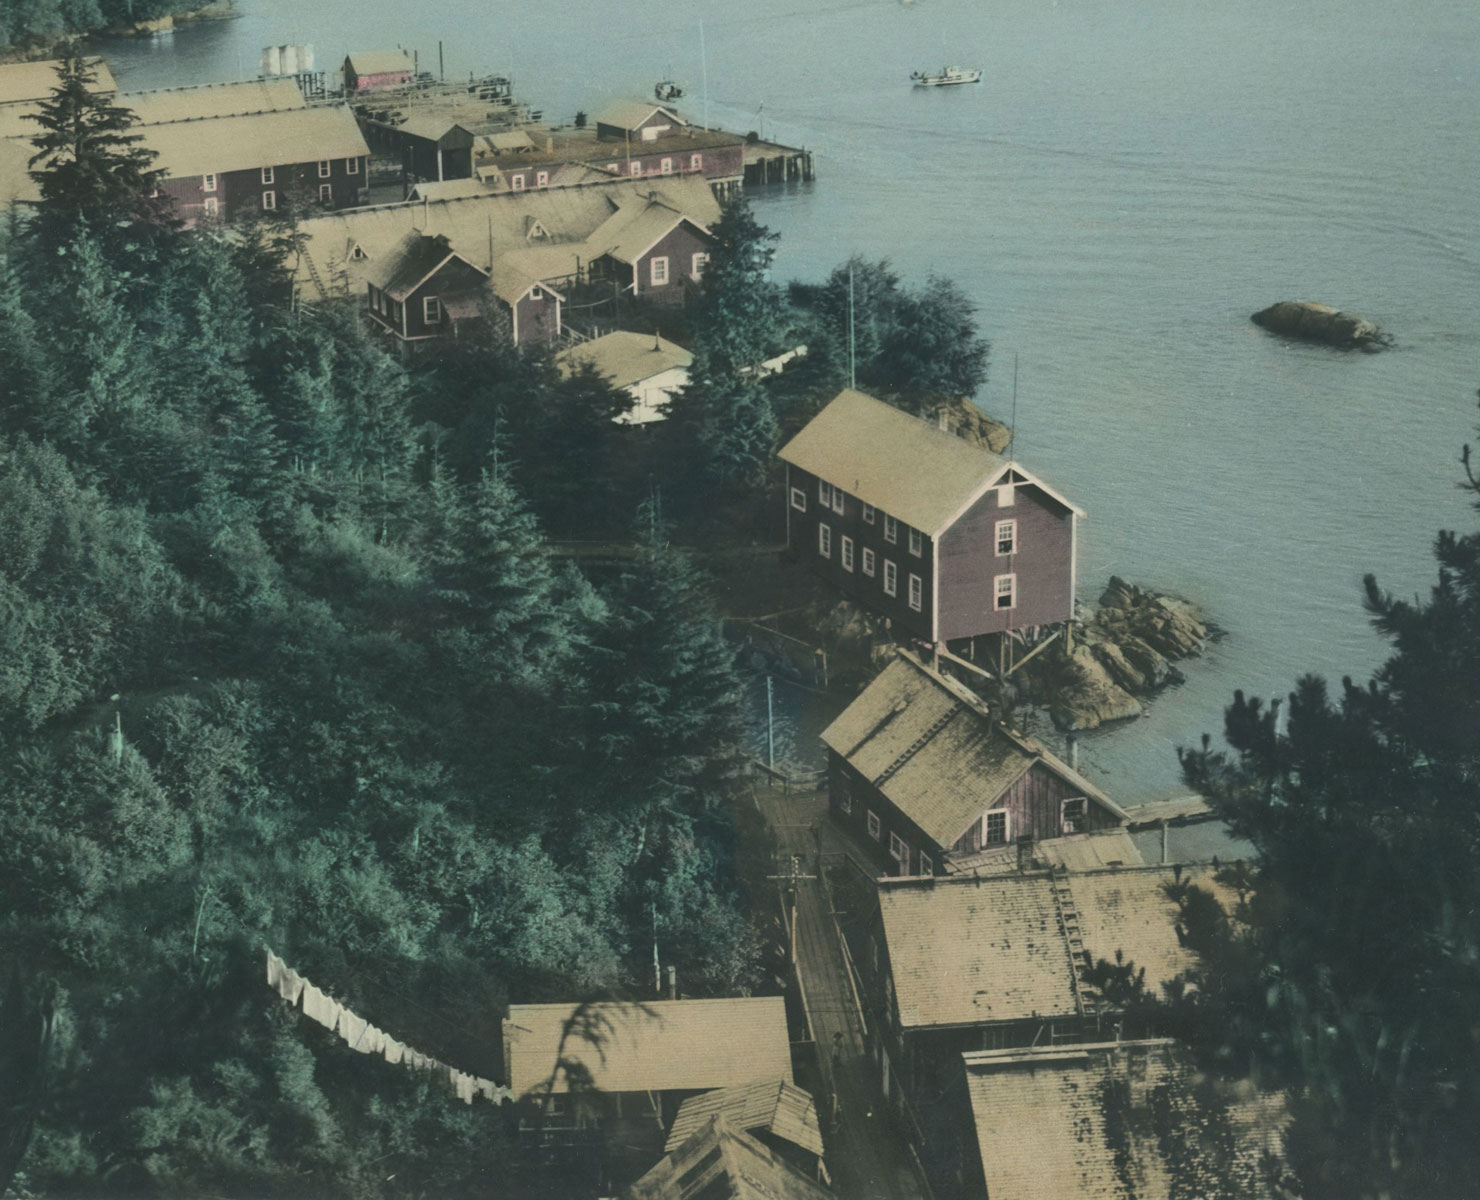 Hand tinted image of Carlisle Cannery buildings, including cannery structures and workers' lodgings, viewed from the top of a nearby hill.